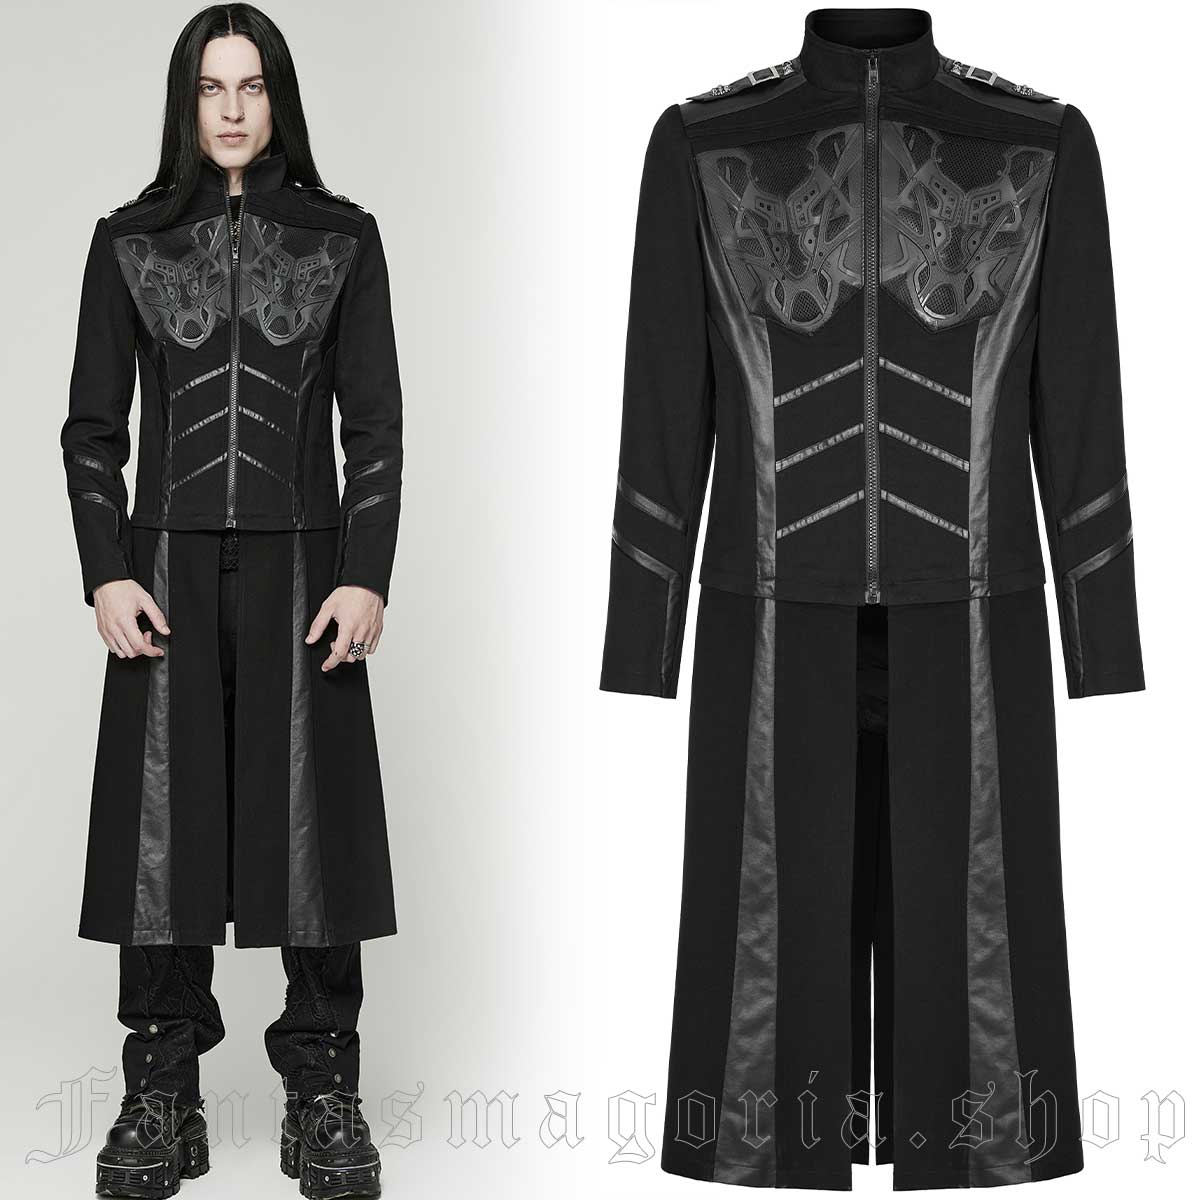 Shop Men's Coats & Jackets | Gothic and Punk Styles